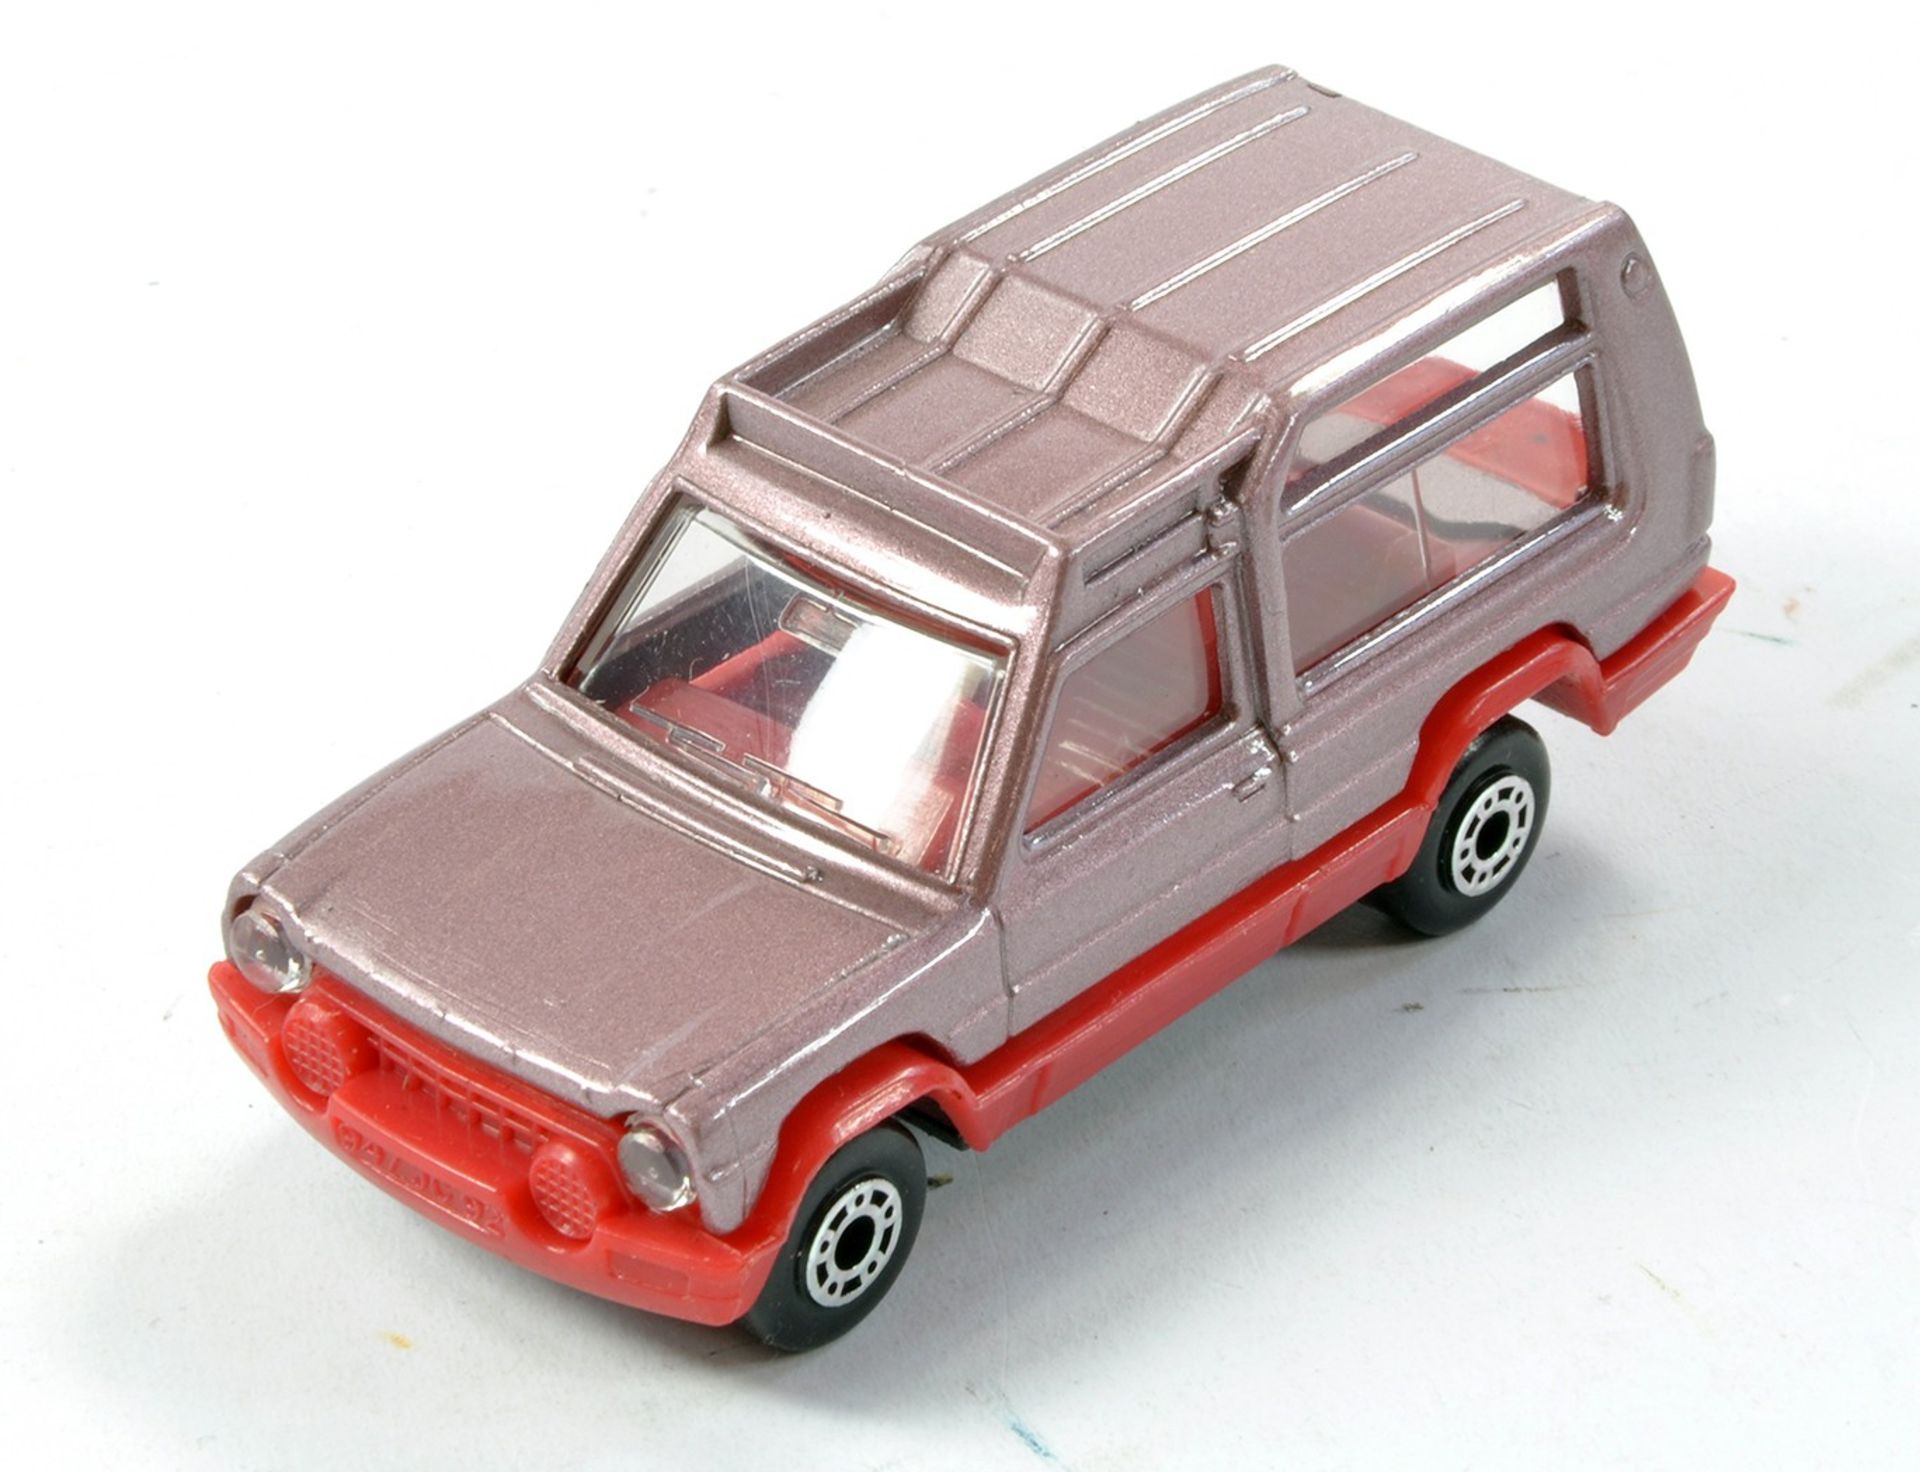 Matchbox Superfast No. 37e Matra Rancho. Made in Bulgaria. Mauve and Red with Gun Metal painted